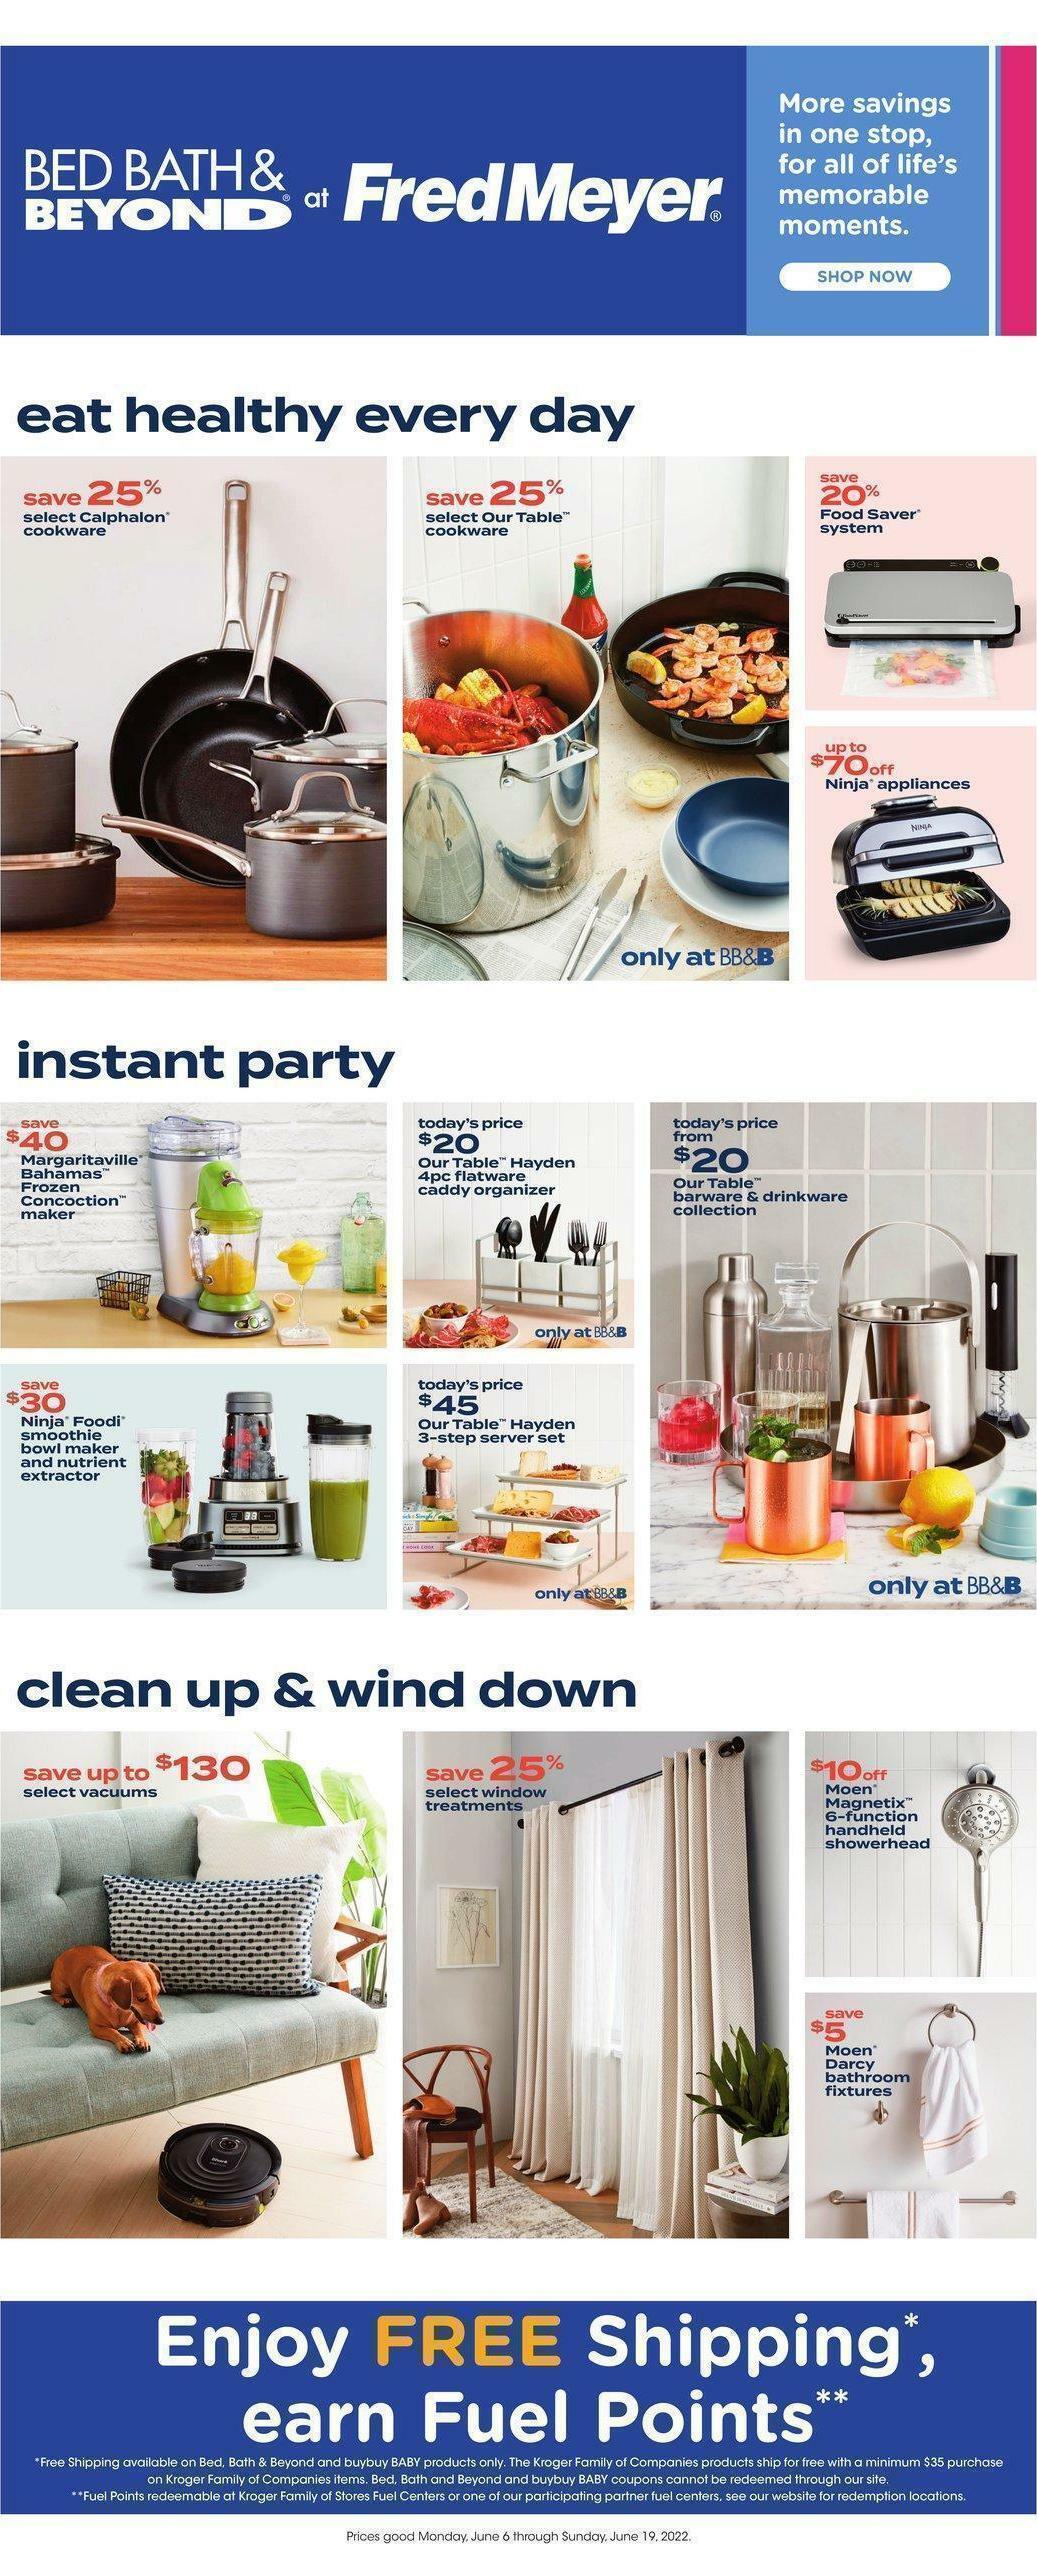 Fred Meyer Bed, Bath & Beyond Weekly Ad from June 6